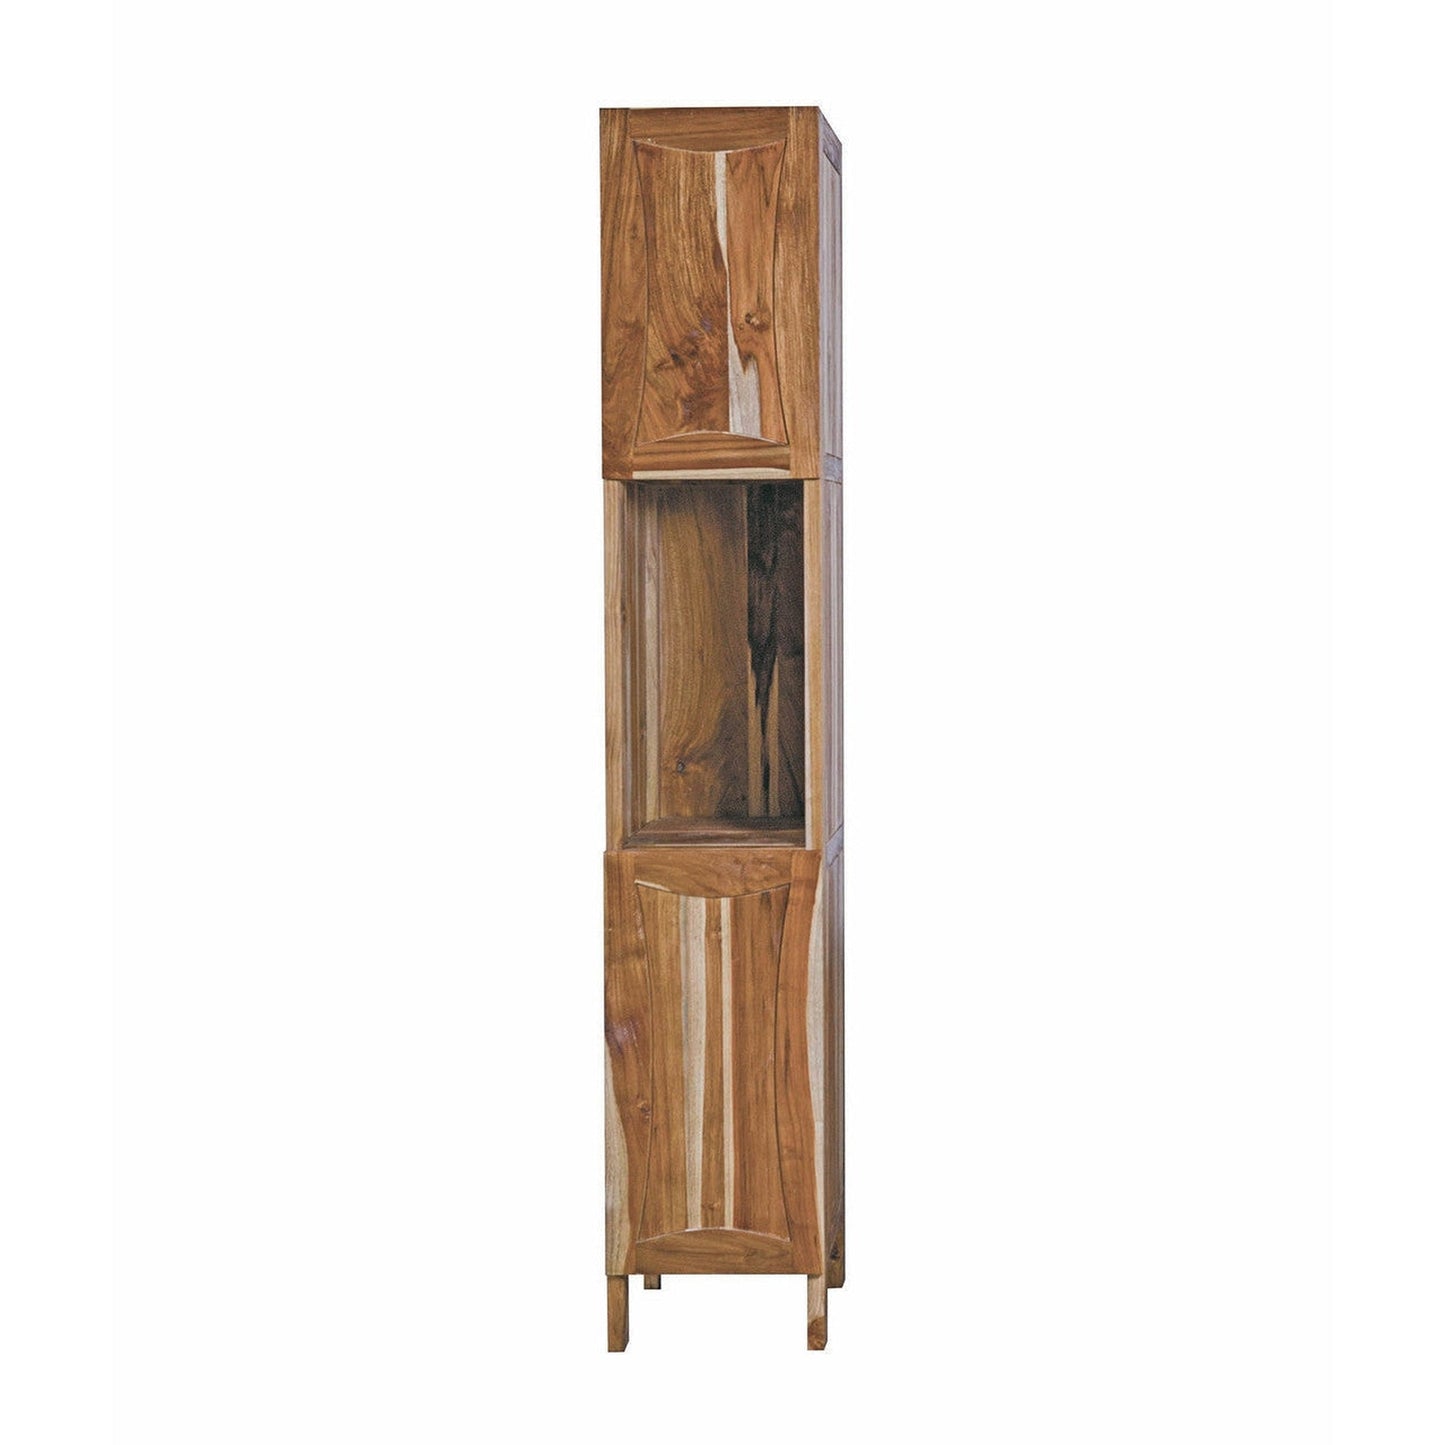 EcoDecors Curvature 79" EarthyTeak Solid Teak Wood Fully Assembled Freestanding Linen Tower